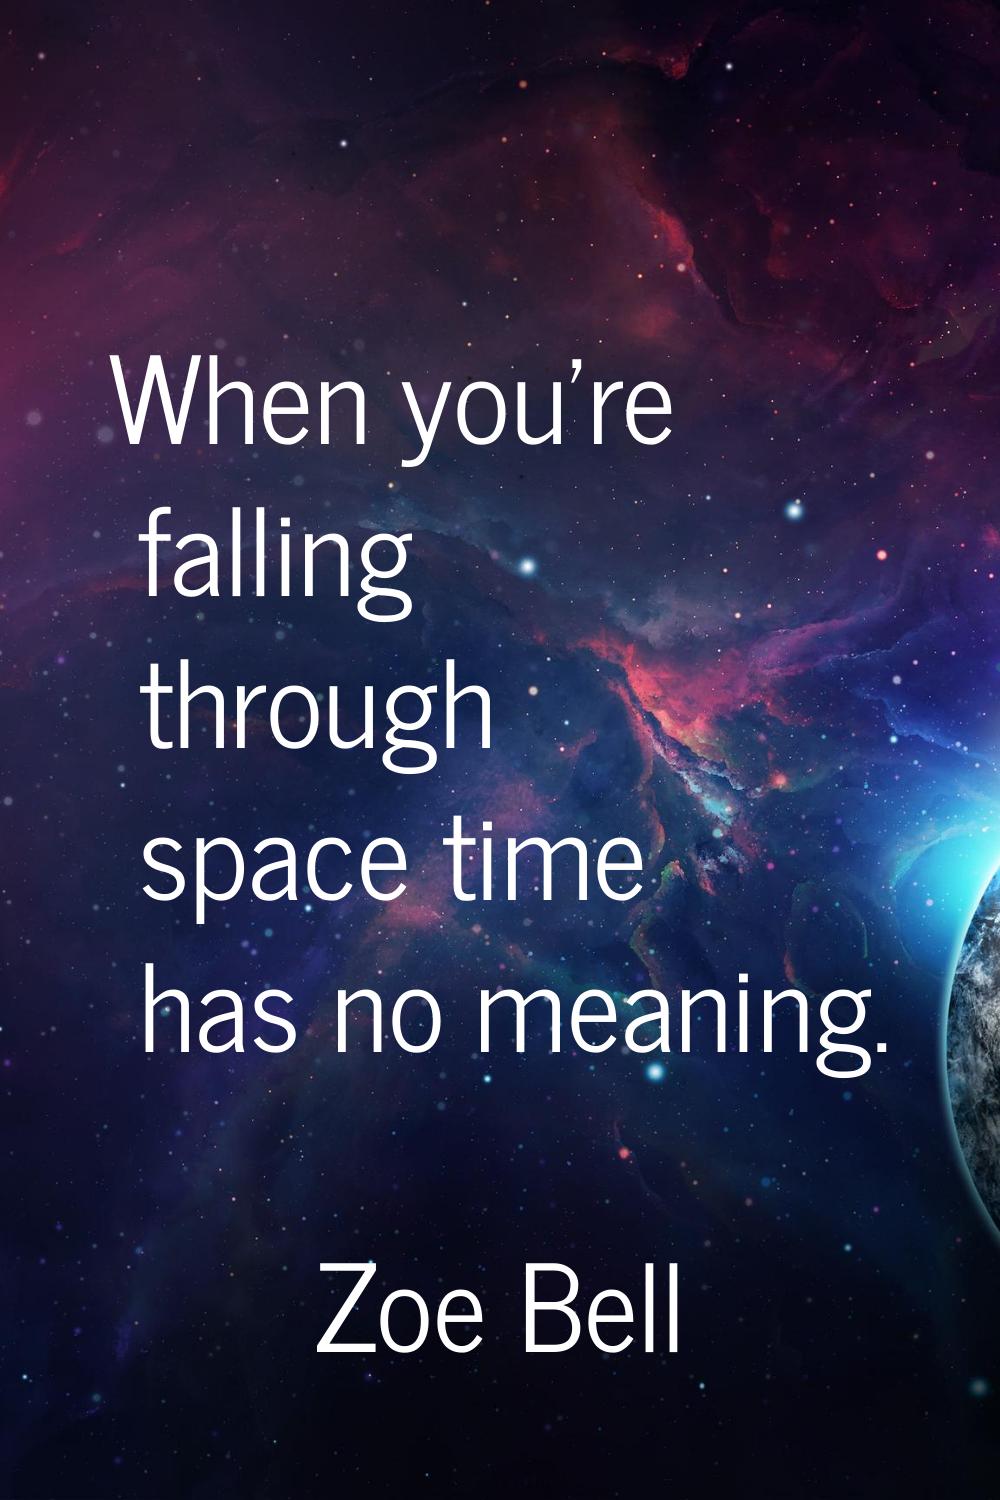 When you're falling through space time has no meaning.